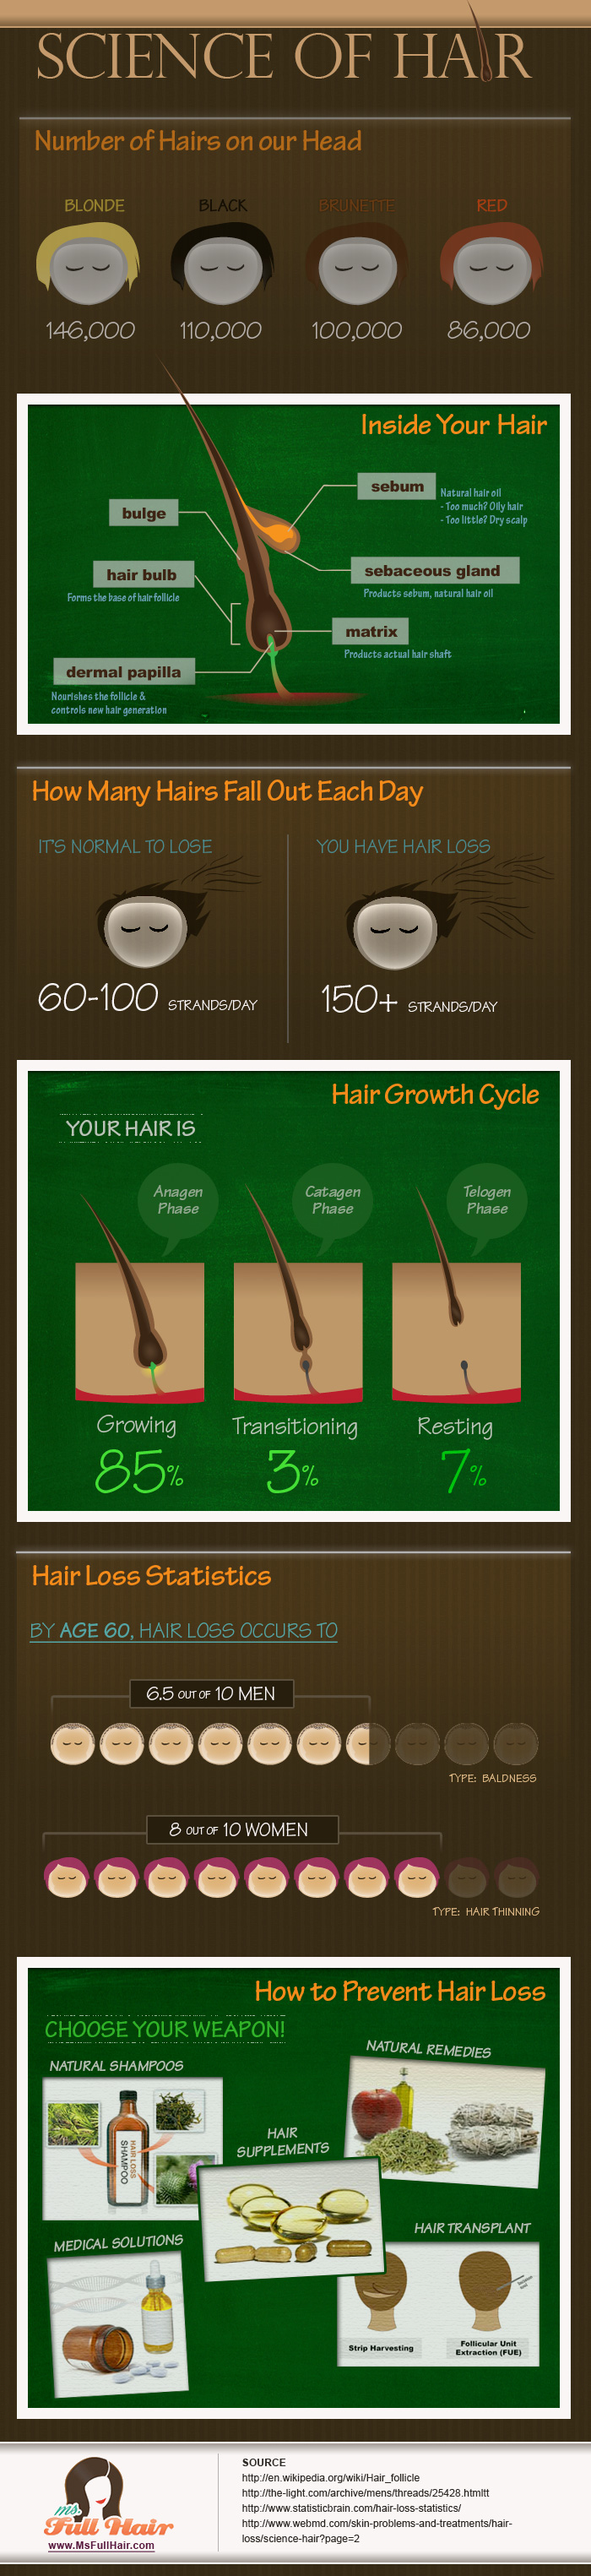 infographic science of hair care